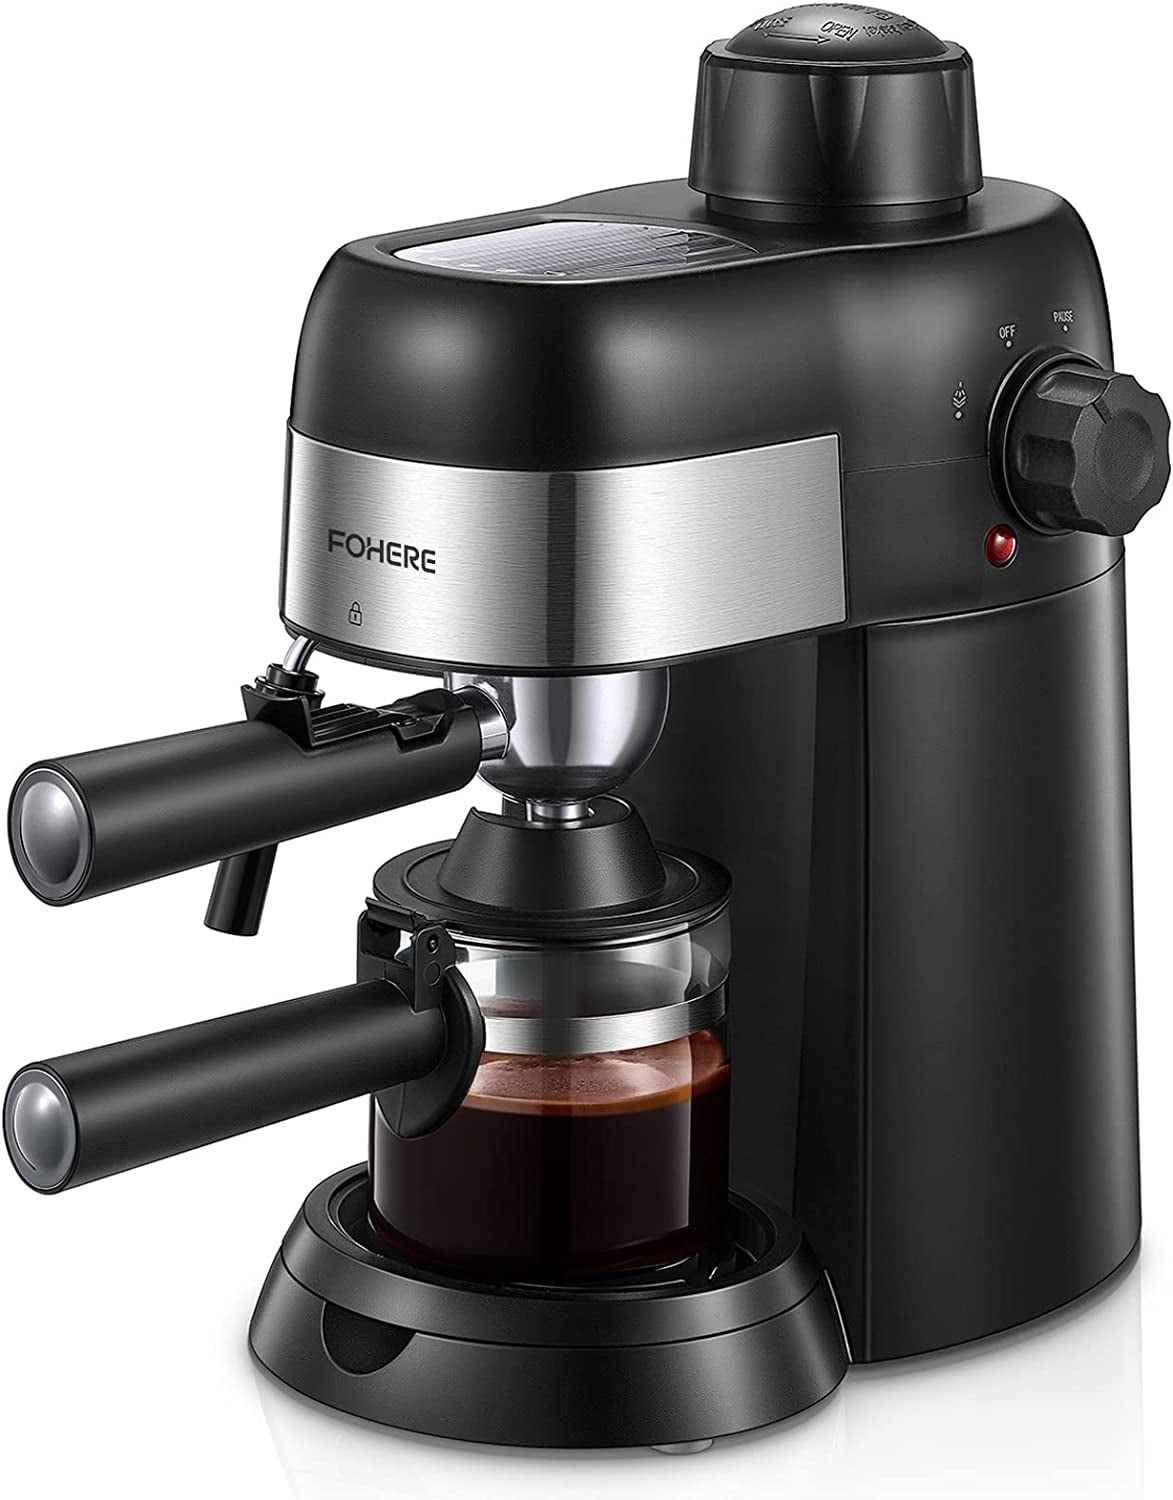 Gourmia 1.2L 15 Bar Espresso Maker with Powerful Frothing Wand Black 